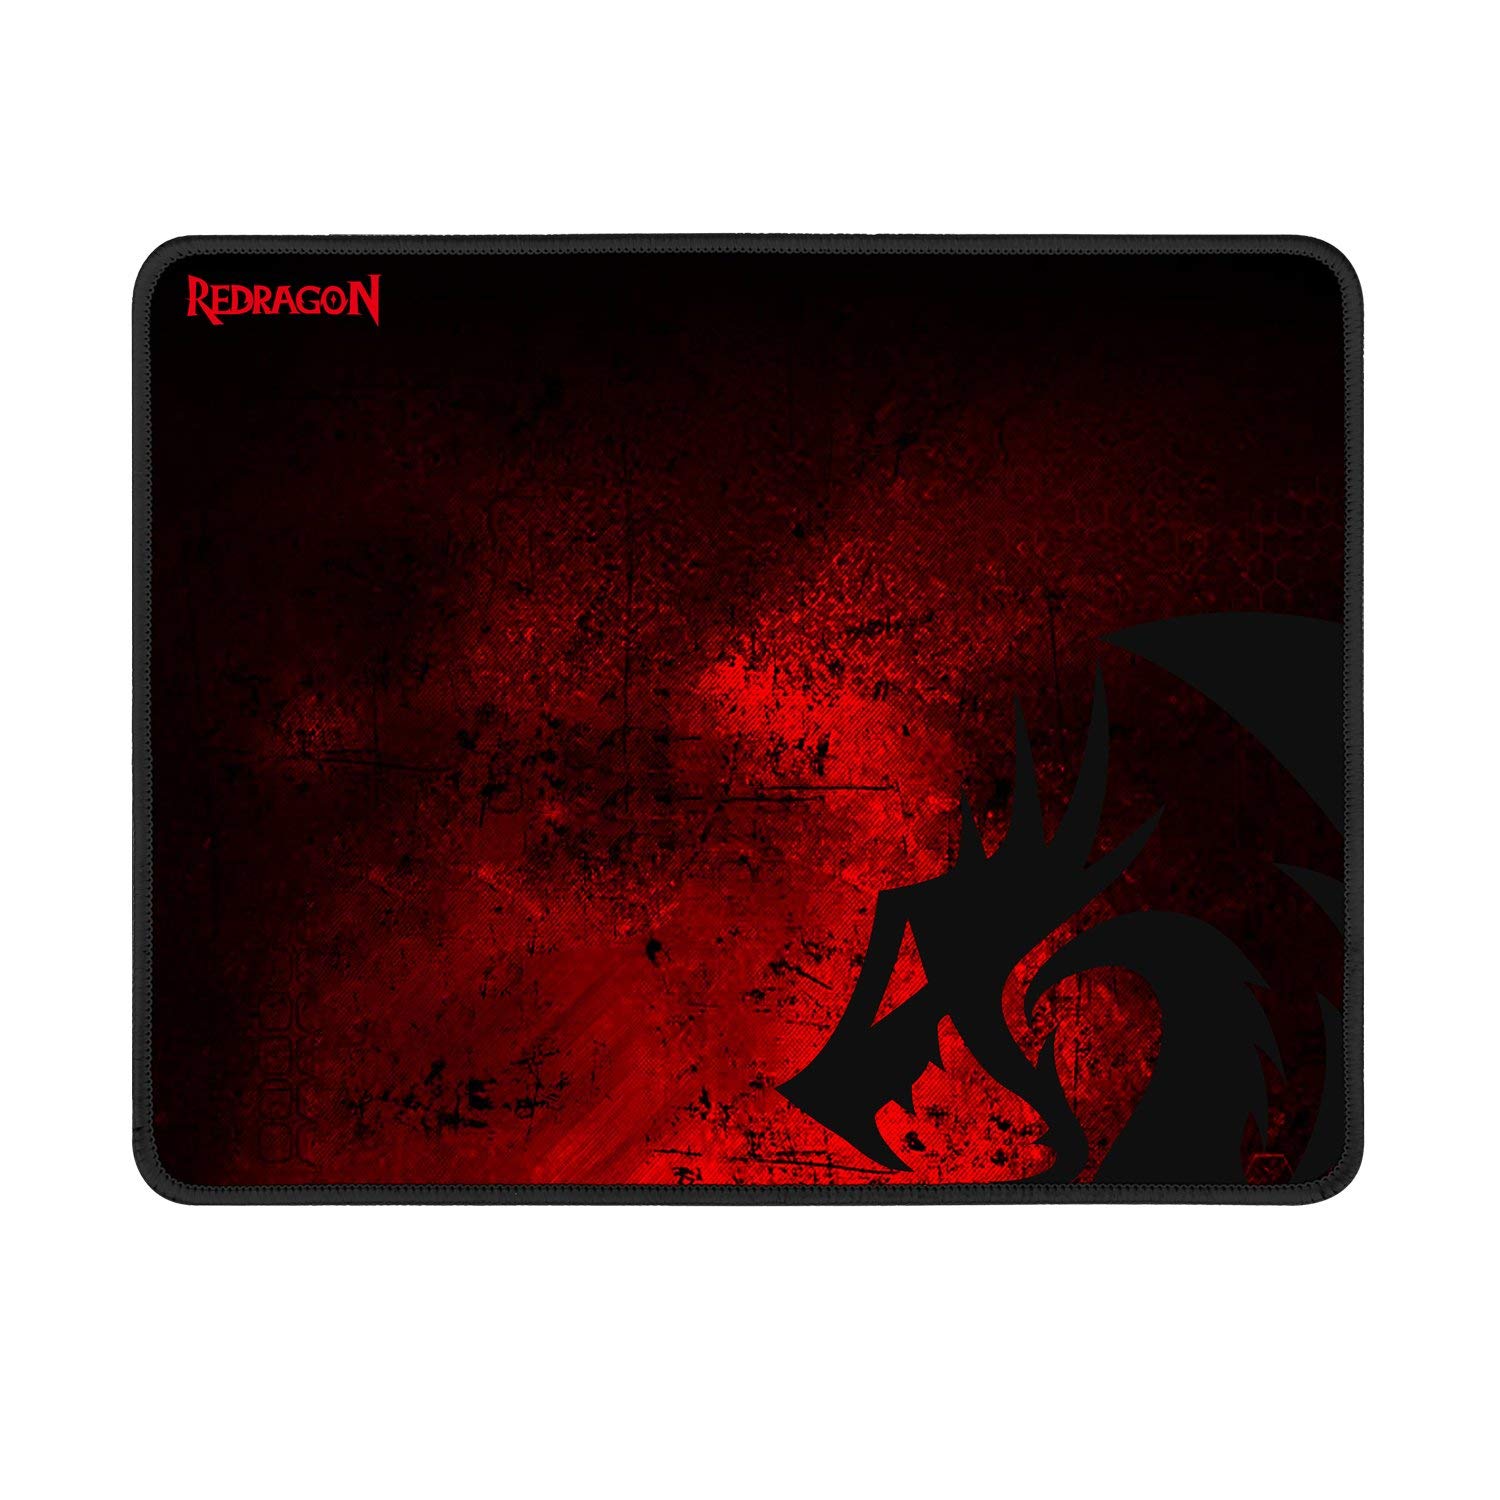 Book Cover Redragon P016 Gaming Mouse Pad, Large 13 x 10.2 x 0.1 Inches, Stitched Edges, Waterproof, Black Red Dragon Design, Pixel-Perfect Accuracy Optimized for All MMO Computer Mouse Sensitivity and Sensors (13 x 10.2 x 0.1 Inches XXL) Black + Red